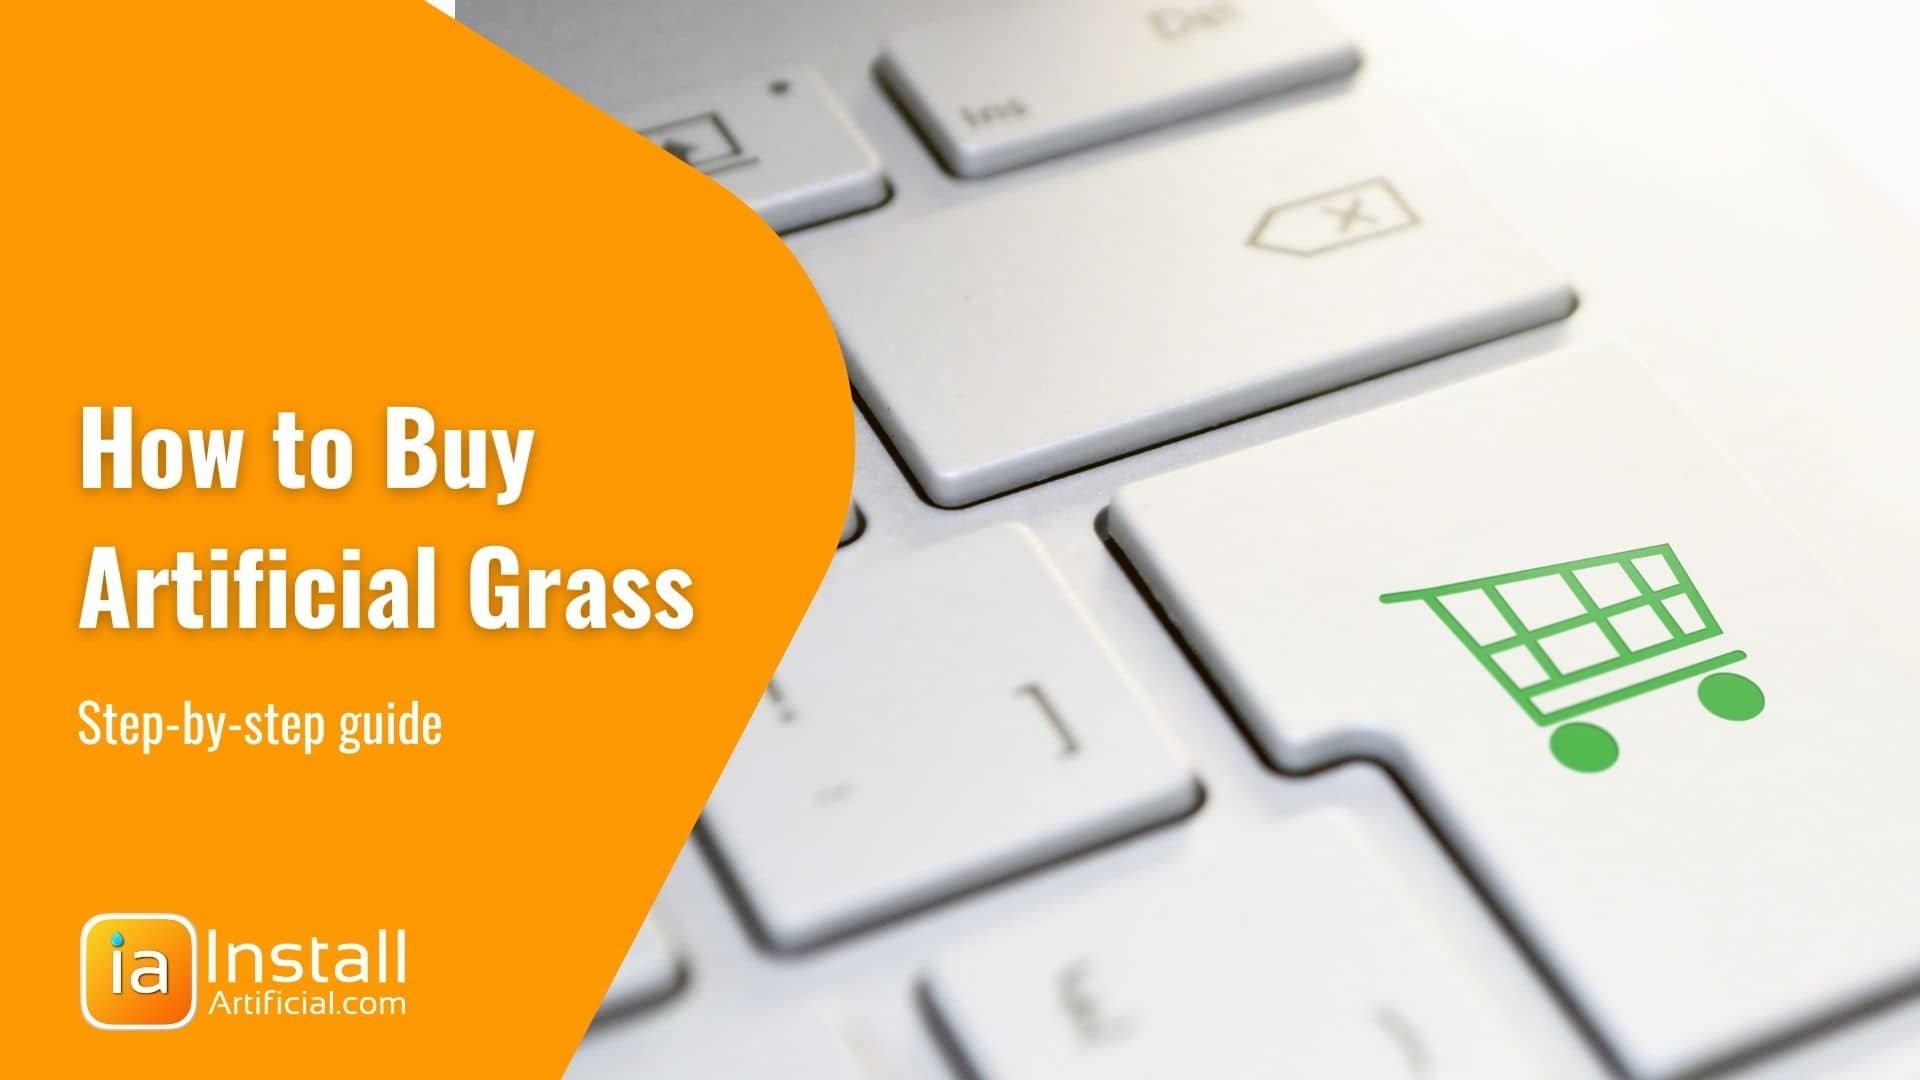 Guide to Buy Artificial Grass